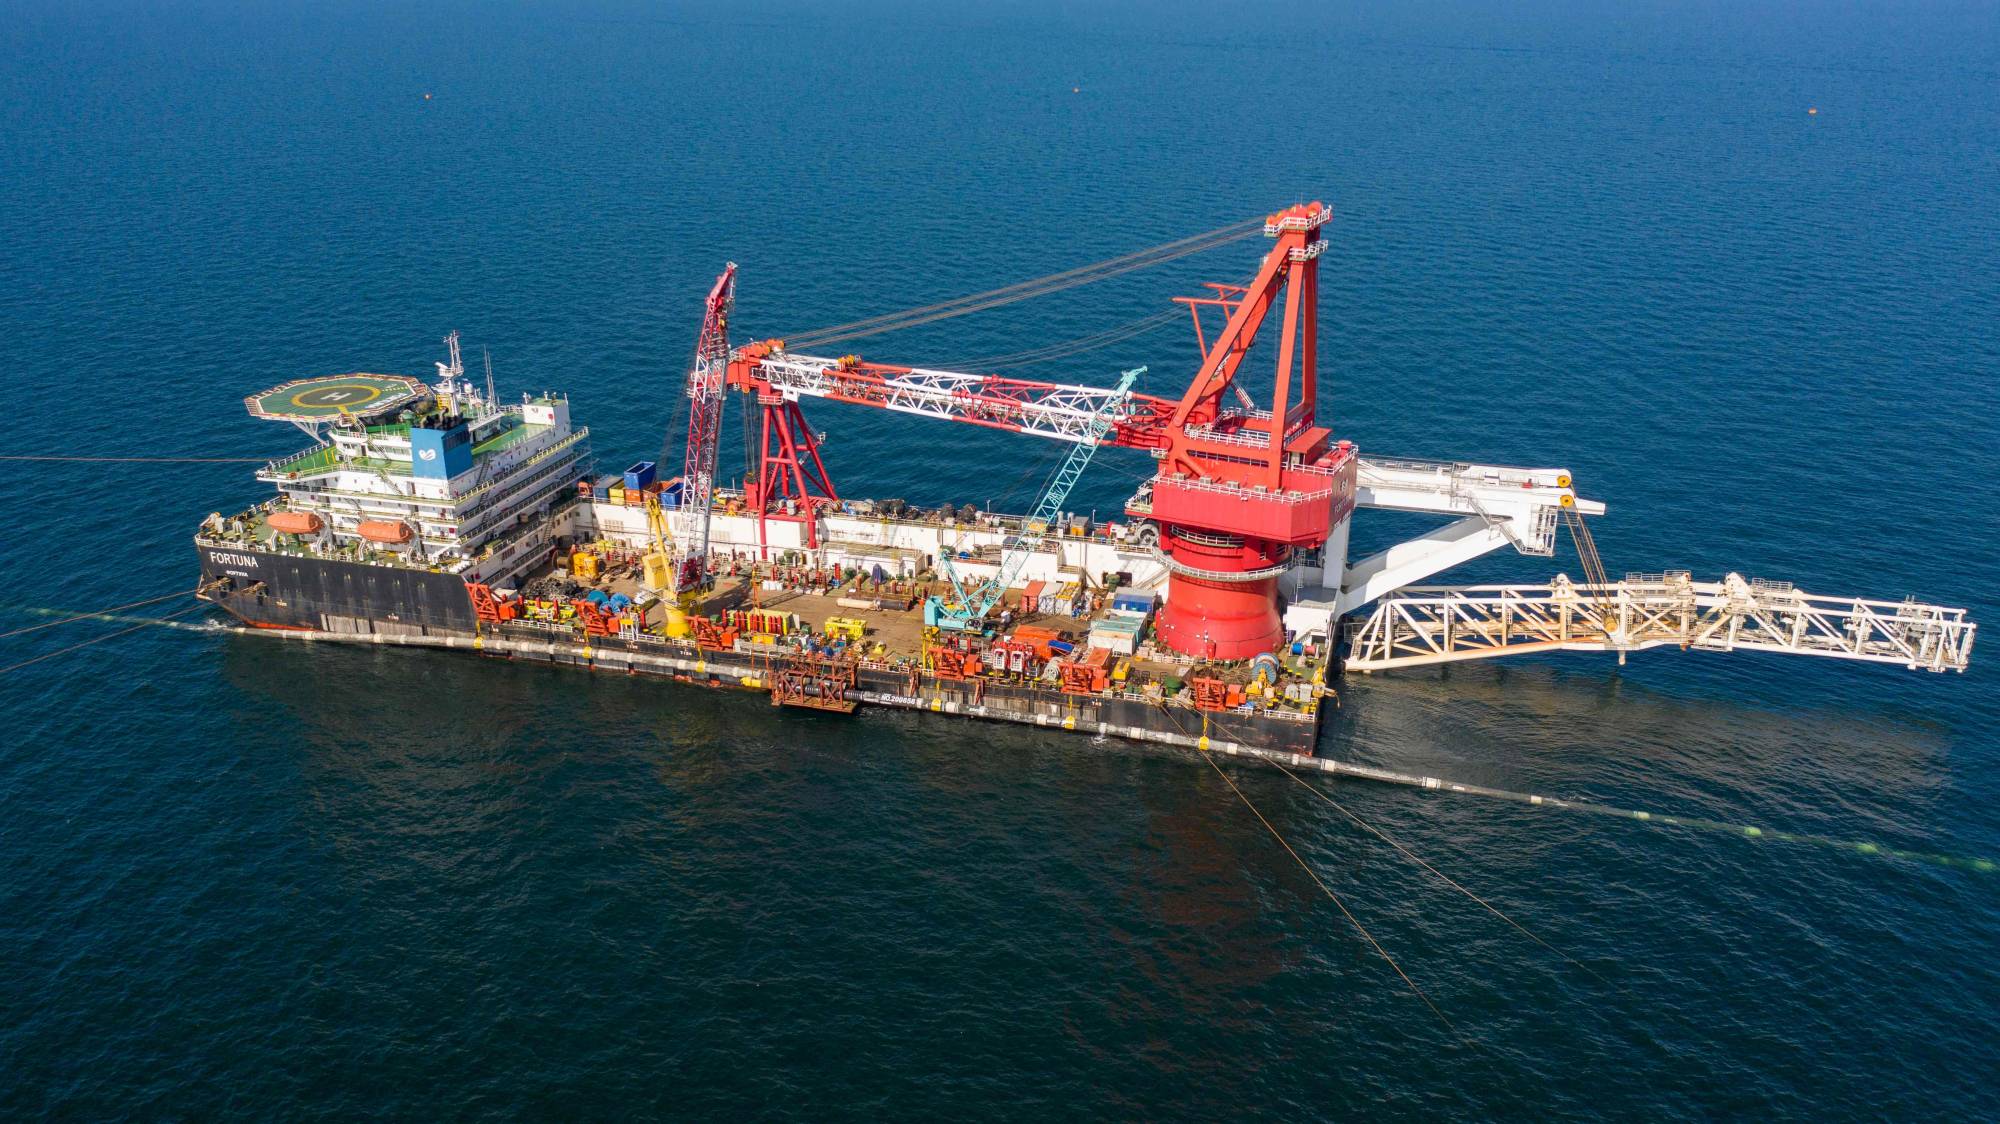 Specialists on the laybarge ship Fortuna performing an above water tie-in during the final stage of Nord Stream 2 pipeline construction in the Baltic Sea in September 2021. Two leaks have been identified on the Nord Stream 1 Russia-to-Europe gas pipeline in the Baltic Sea, hours after a similar incident on its twin pipeline Nord Stream 2, Scandinavian authorities said on Tuesday. | NORD STREAM 2 AG / VIA AFP-JIJI